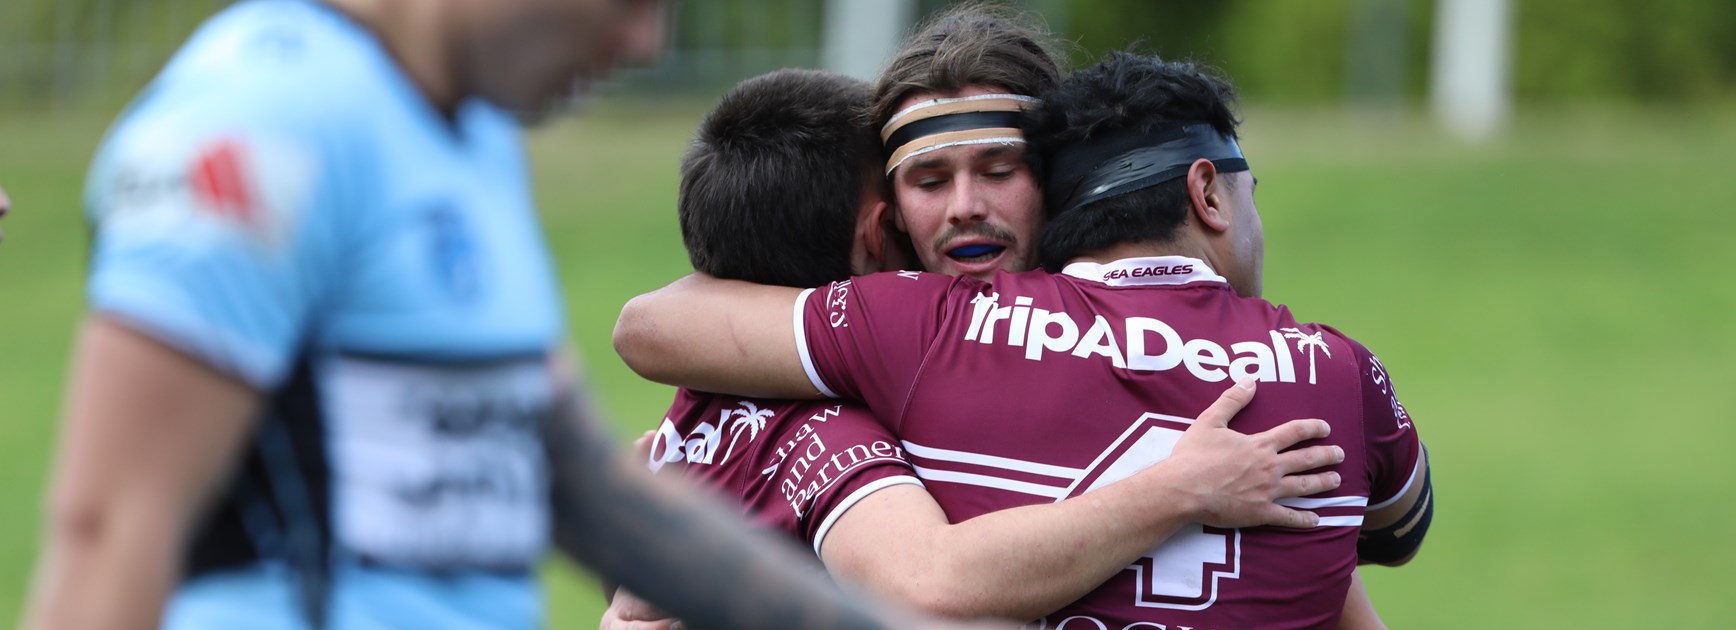 Sea Eagles thump Sharks 50-22 in superb win